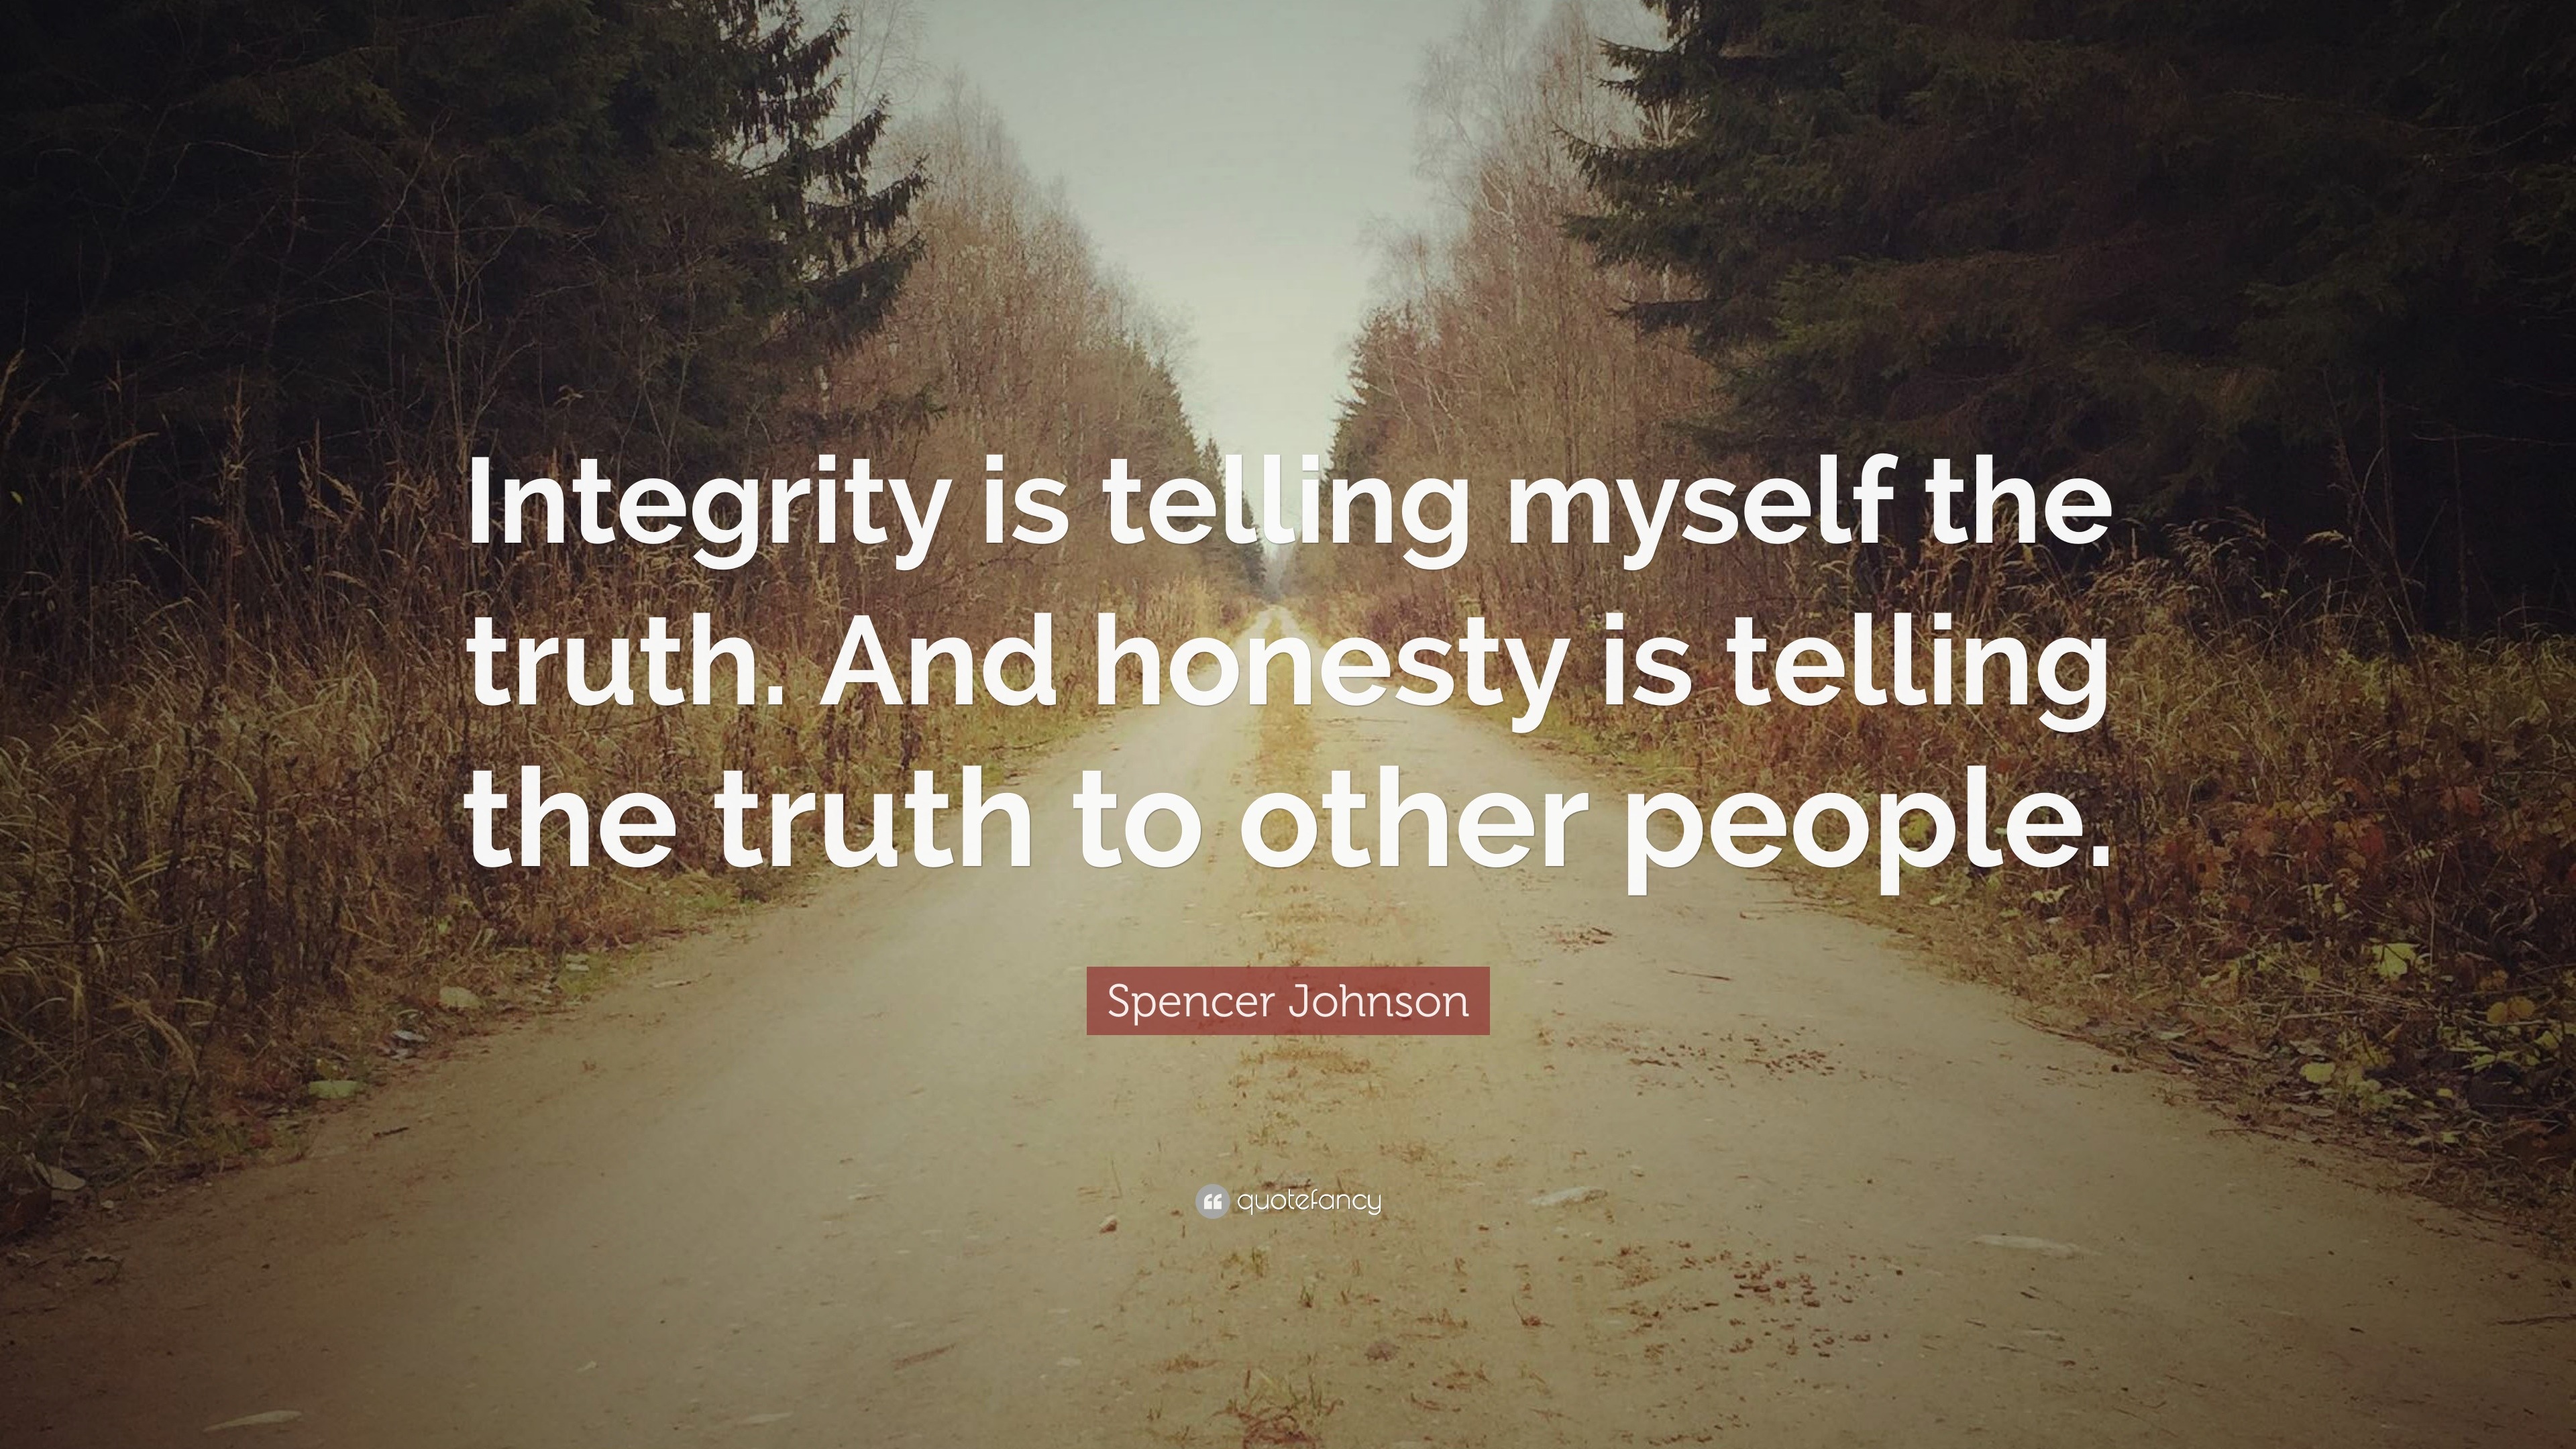 spencer-johnson-quote-integrity-is-telling-myself-the-truth-and